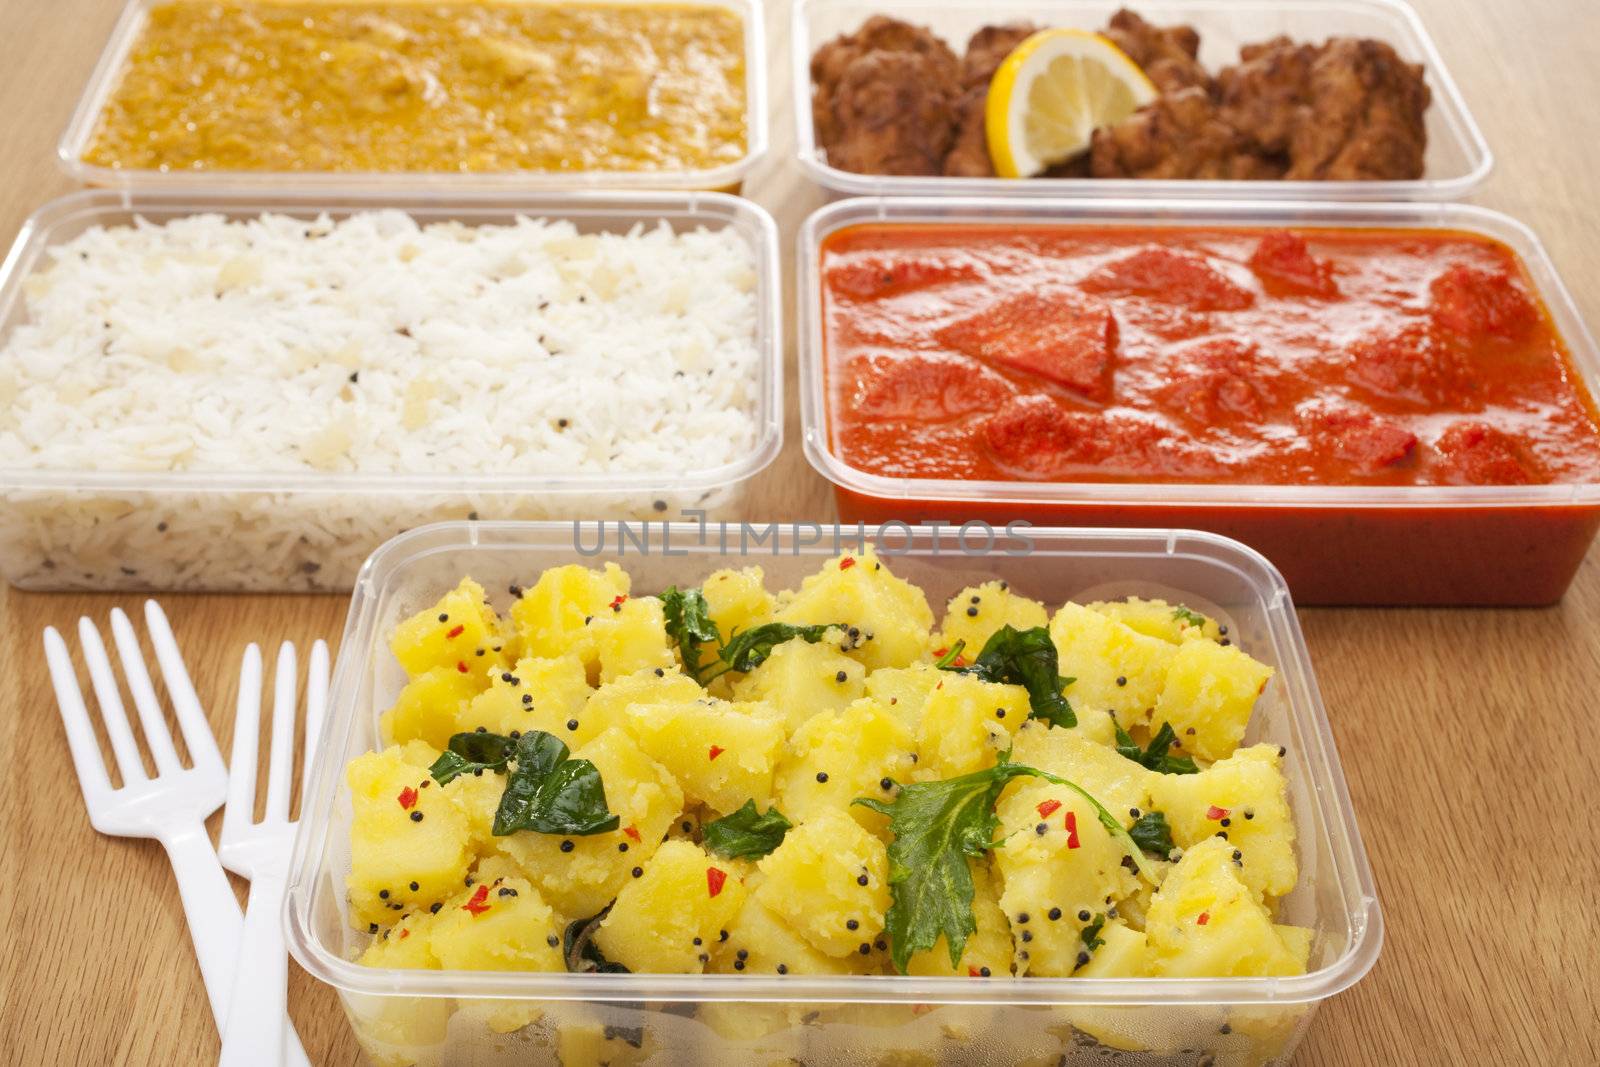 A selection of Indian takeaway food in plastic containers on a wooden table. Aloo saag (potato spinach curry), chicken tikka masala, chicken bhoon or  bhuna, basmati rice and onion bhaji or pakora.